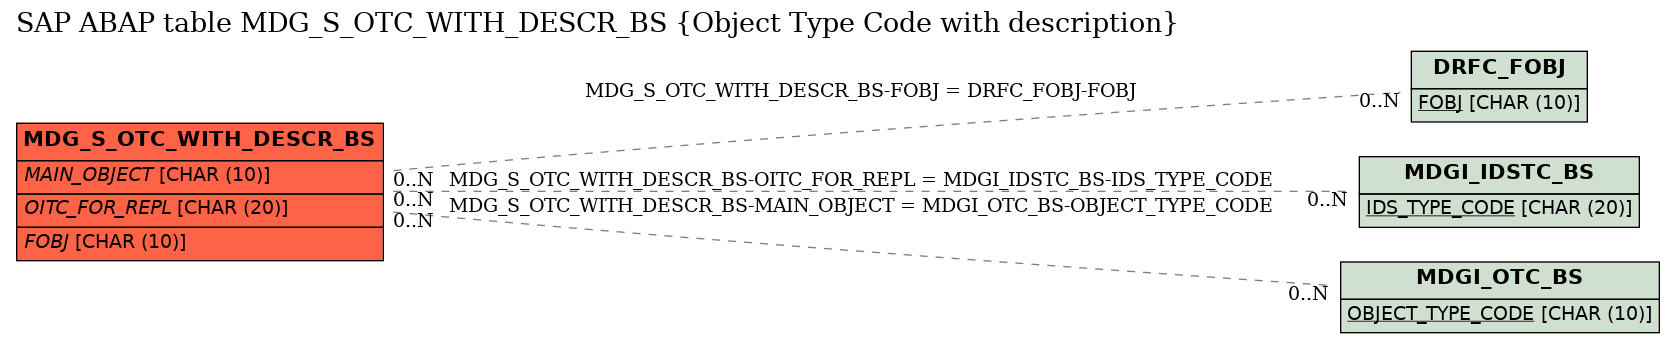 E-R Diagram for table MDG_S_OTC_WITH_DESCR_BS (Object Type Code with description)